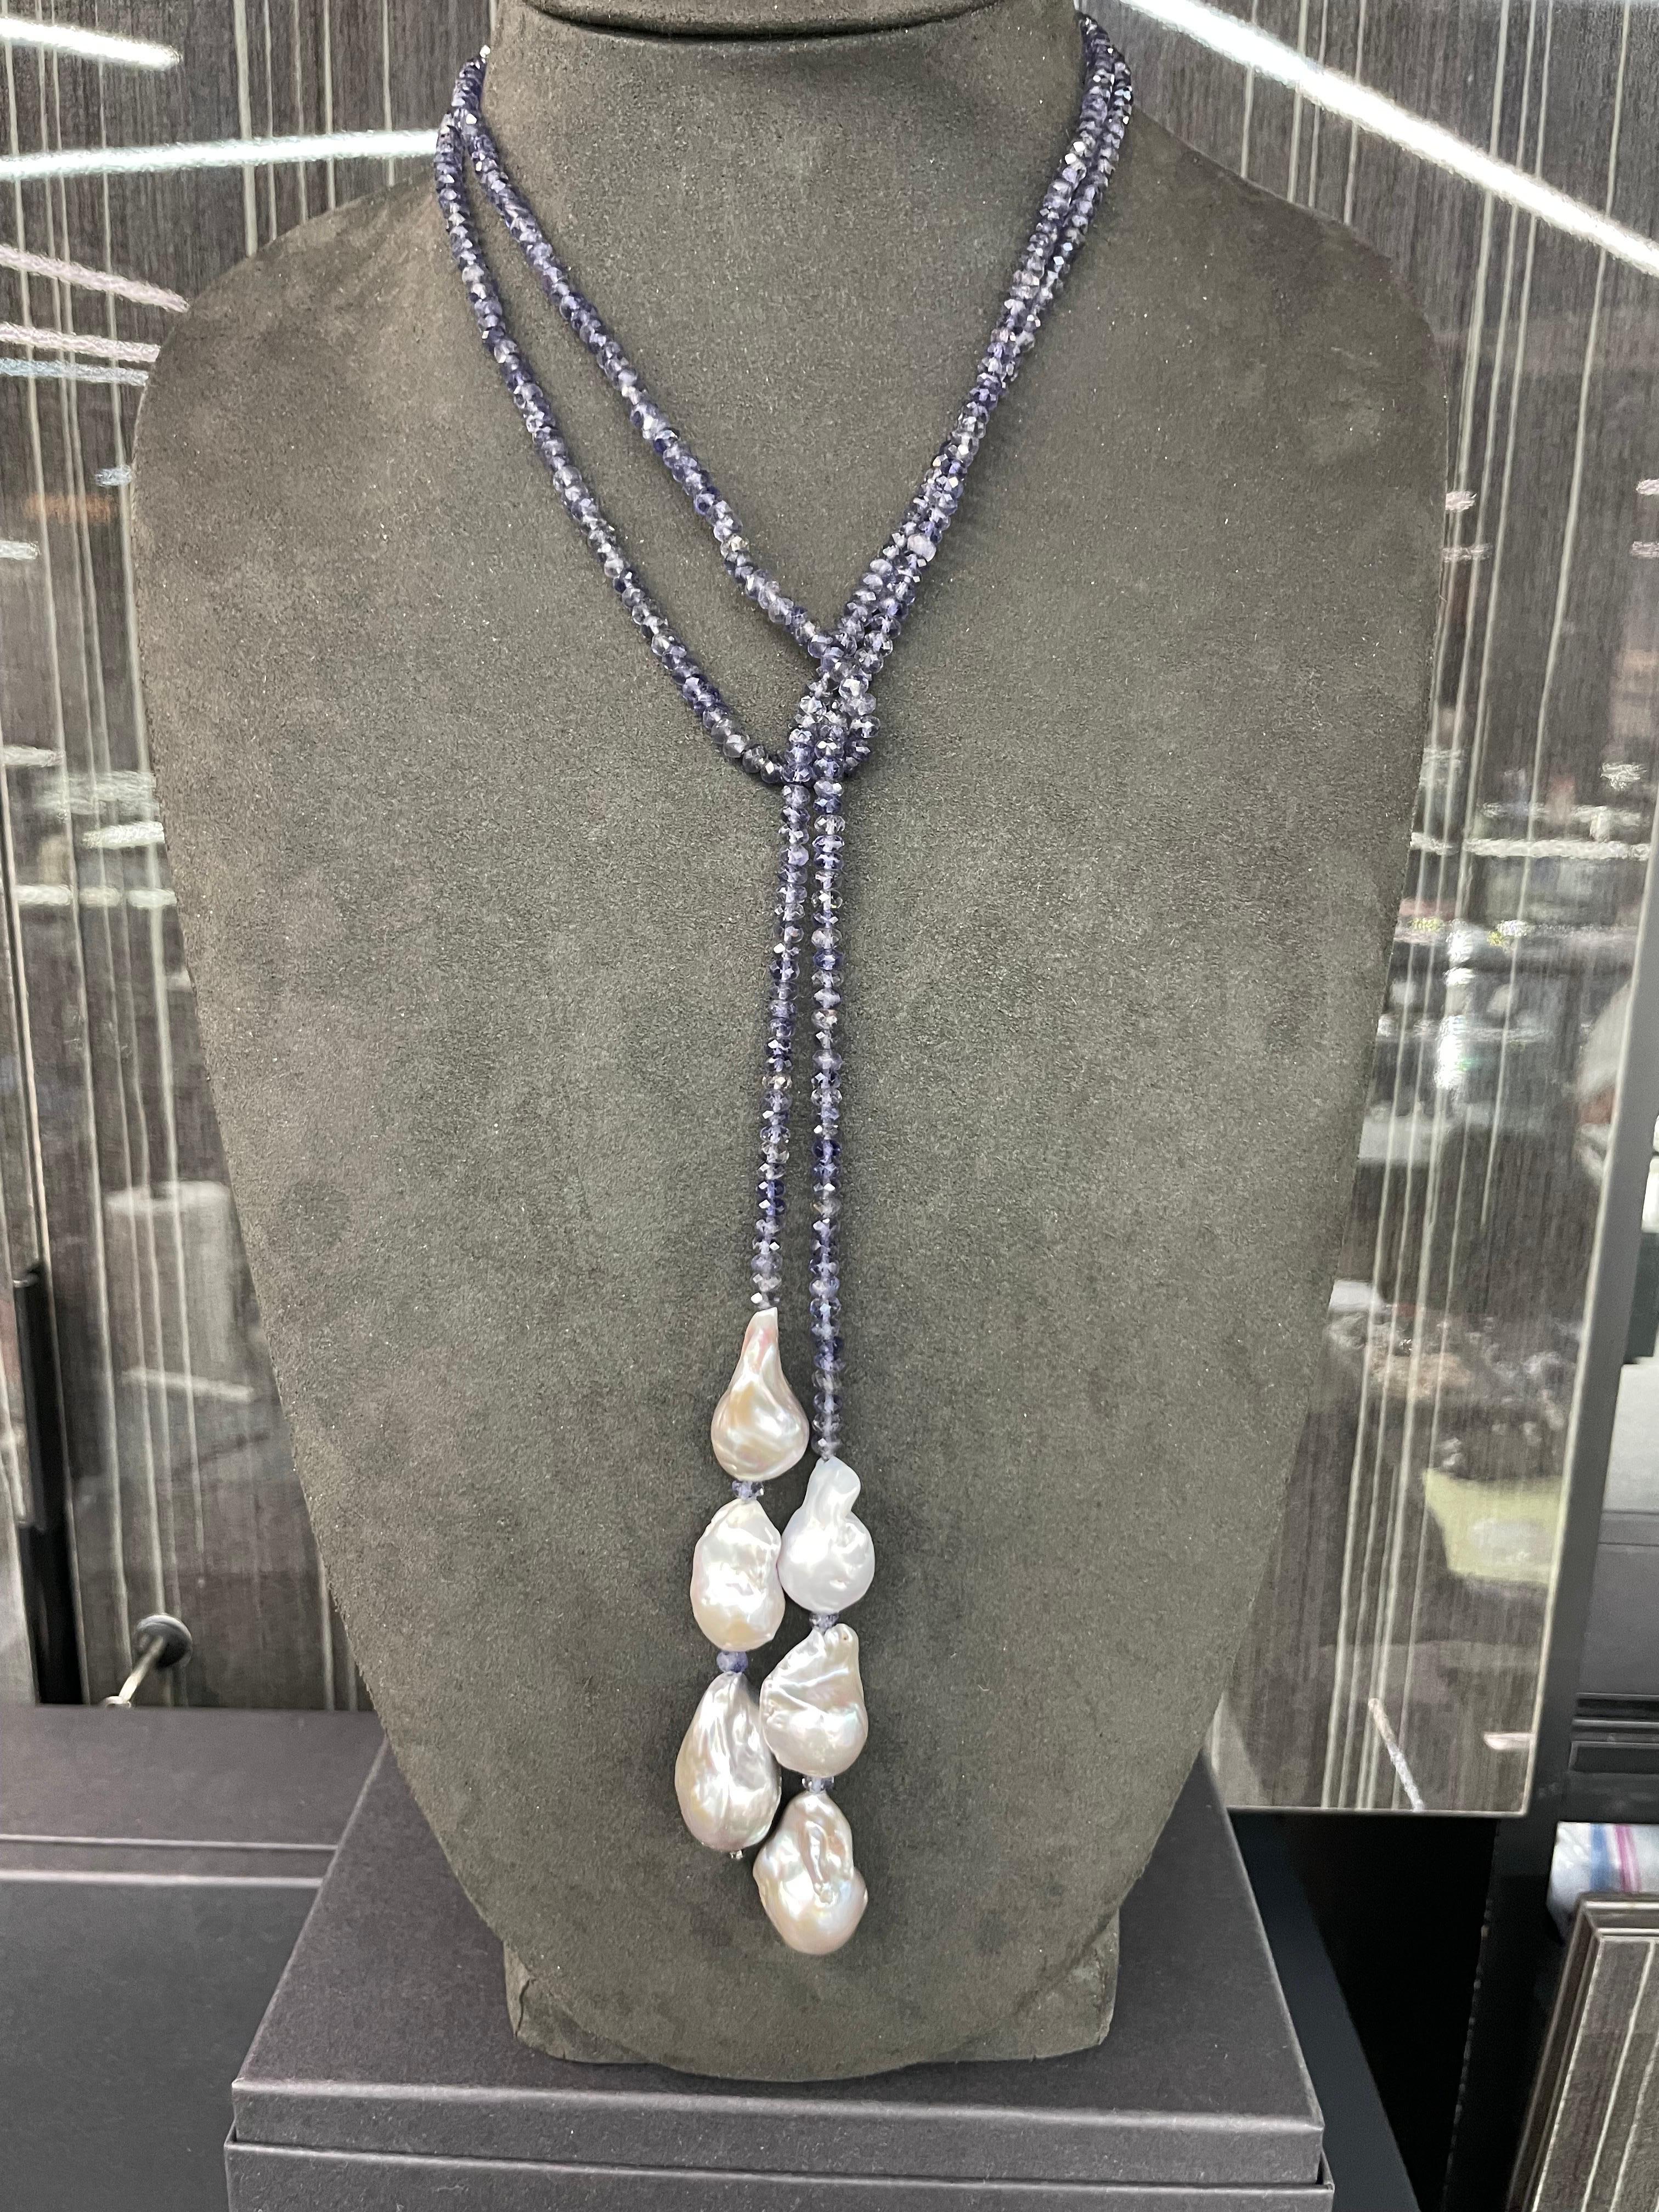 Women's Strand of Iolite Grey Baroque Pearl Tassel Necklace 50 Inches Long For Sale